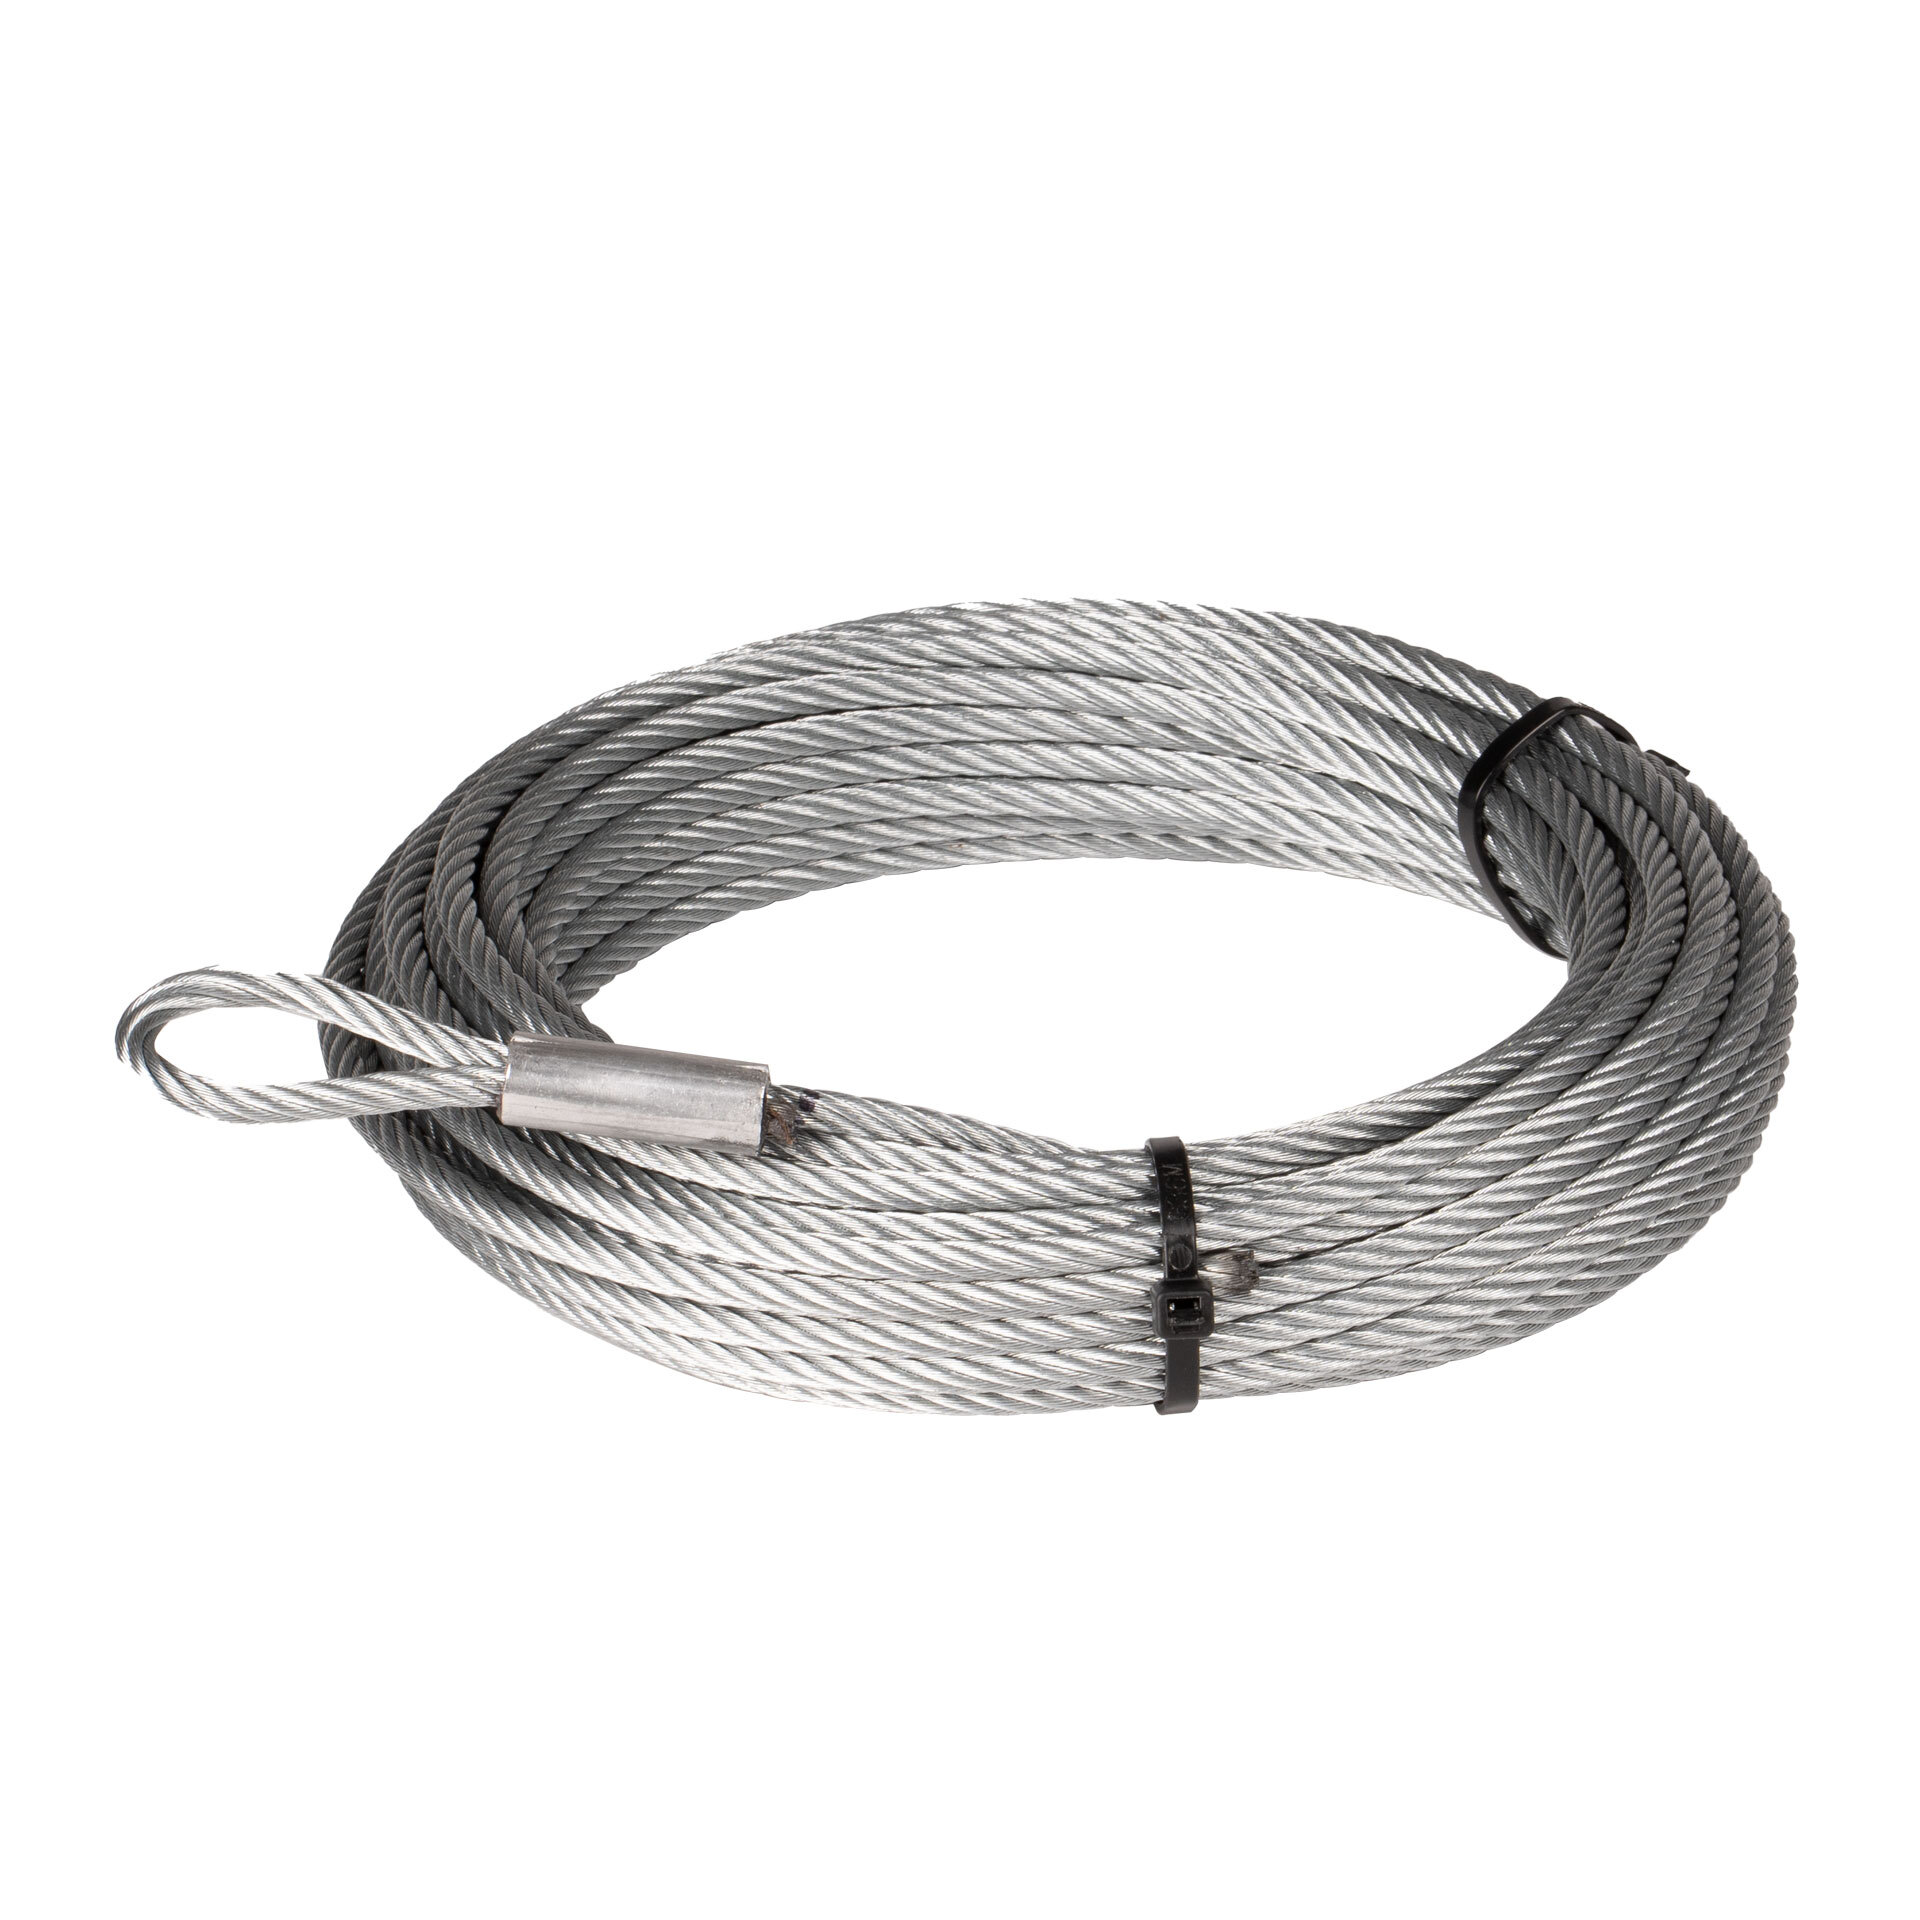 WARN® 3500 lb Wire Rope